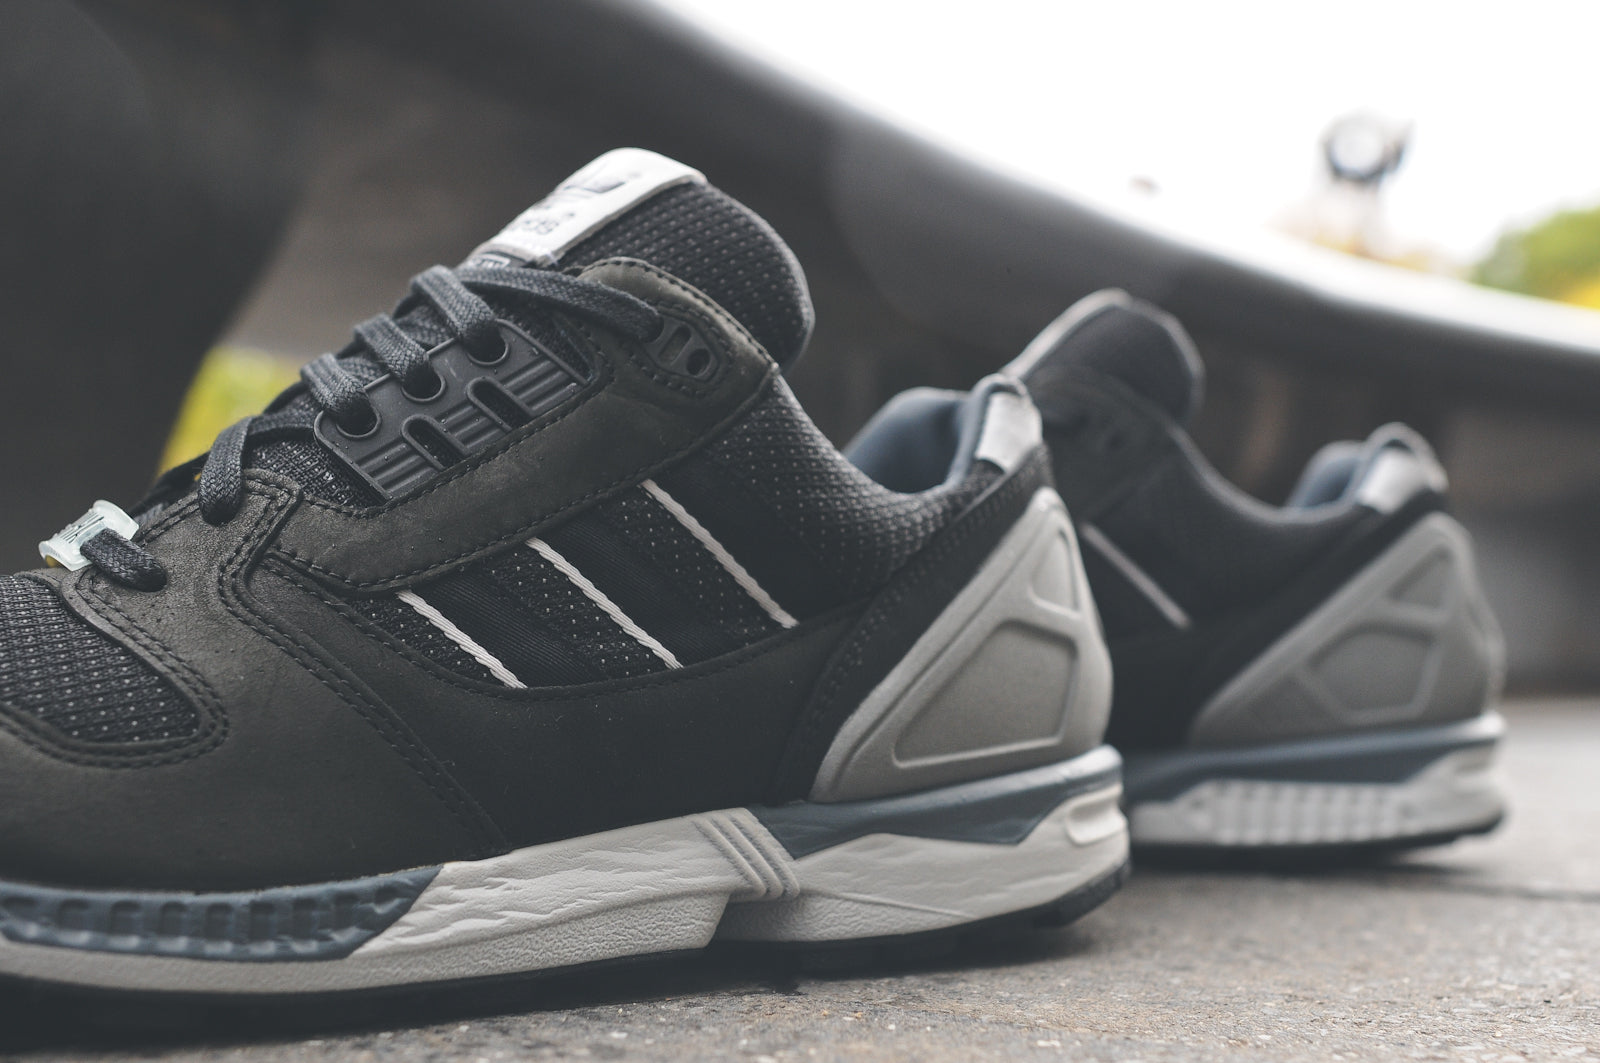 A nueve Betsy Trotwood envase ADIDAS ORIGINALS ZX8000 - "FALL OF THE WALL" PACK @ KITH NYC – Kith